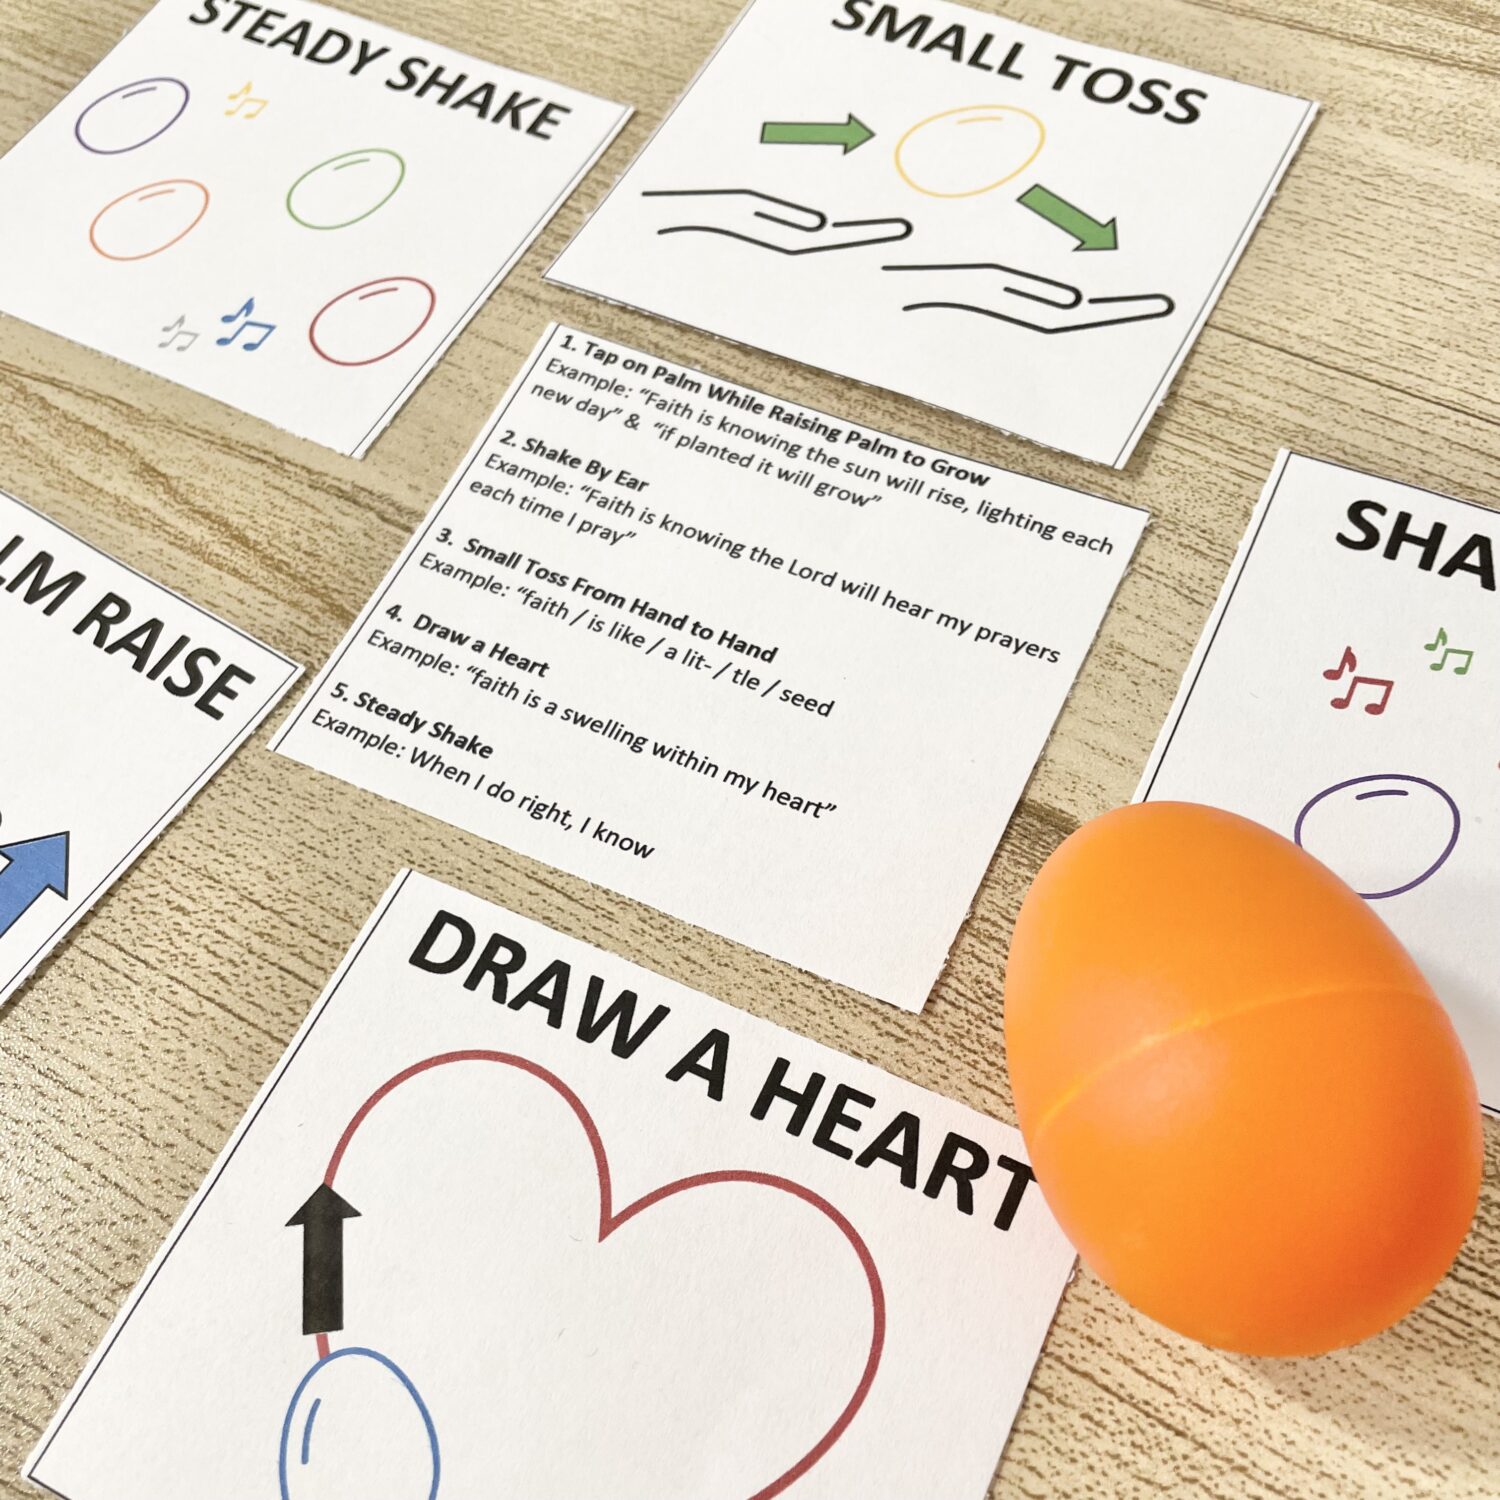 You will love this fun Faith Song Egg Shakers living music activity with 5 different actions to use with egg shakers for LDS Primary Music Leaders teaching this Come Follow Me New Testament Song.